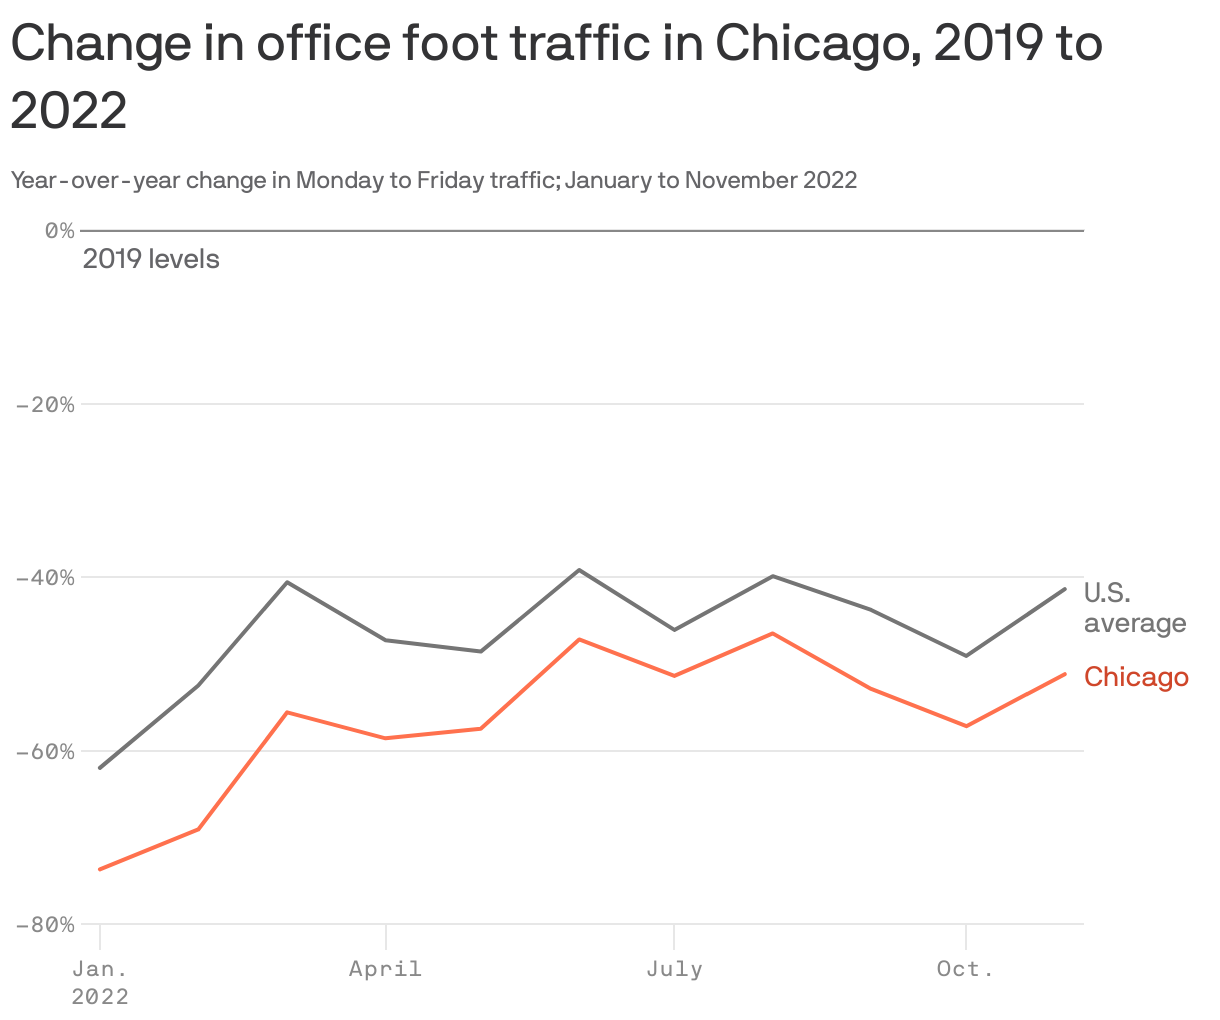 Change in office foot traffic in Chicago, 2019 to 2022